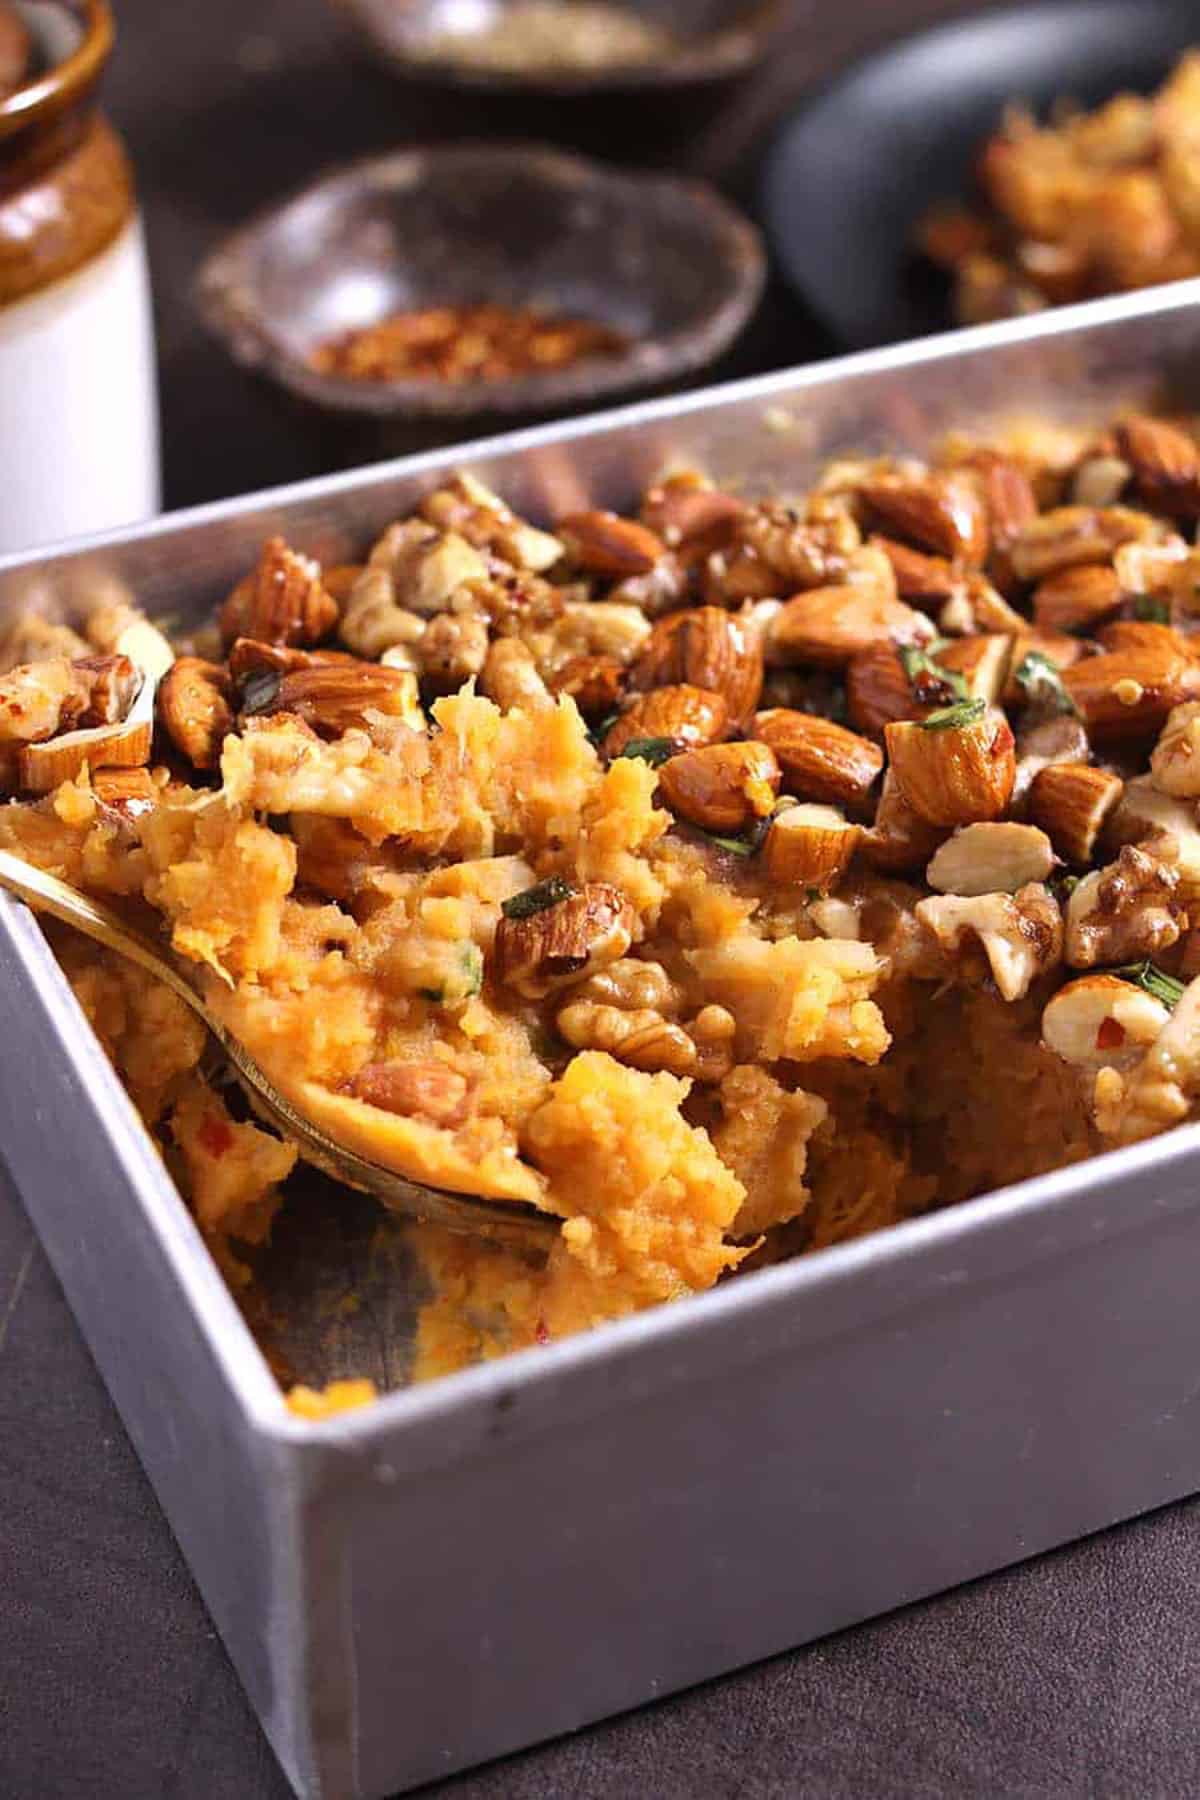 Creamy and savory, healthy sweet potato casserole topped with nuts